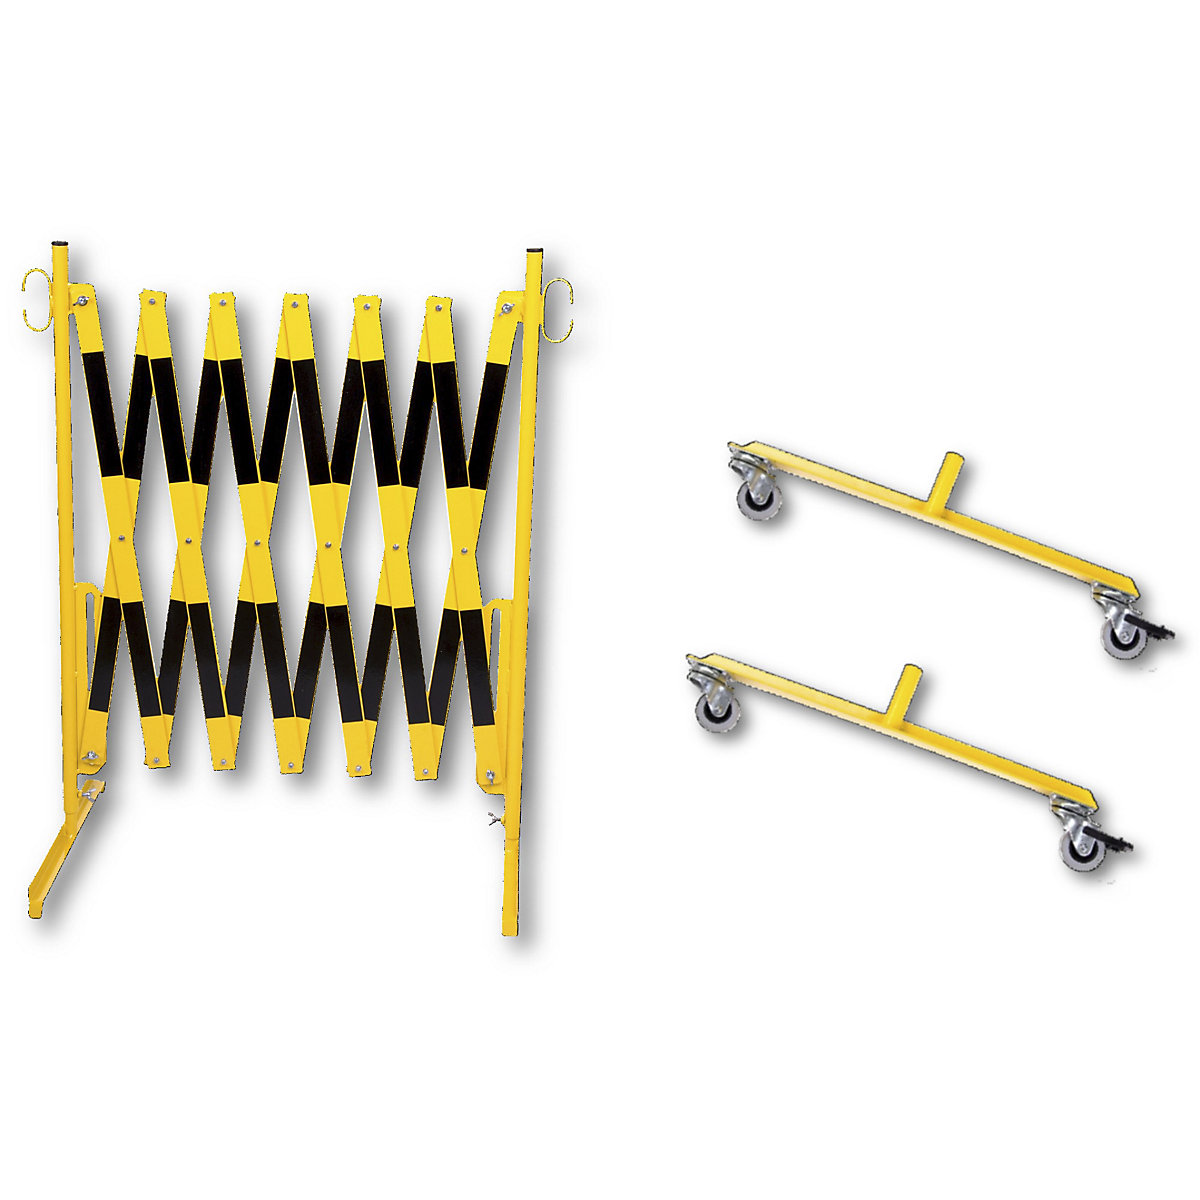 Expanding barrier, with 2 feet with castors, yellow / black, max. length 3600 mm